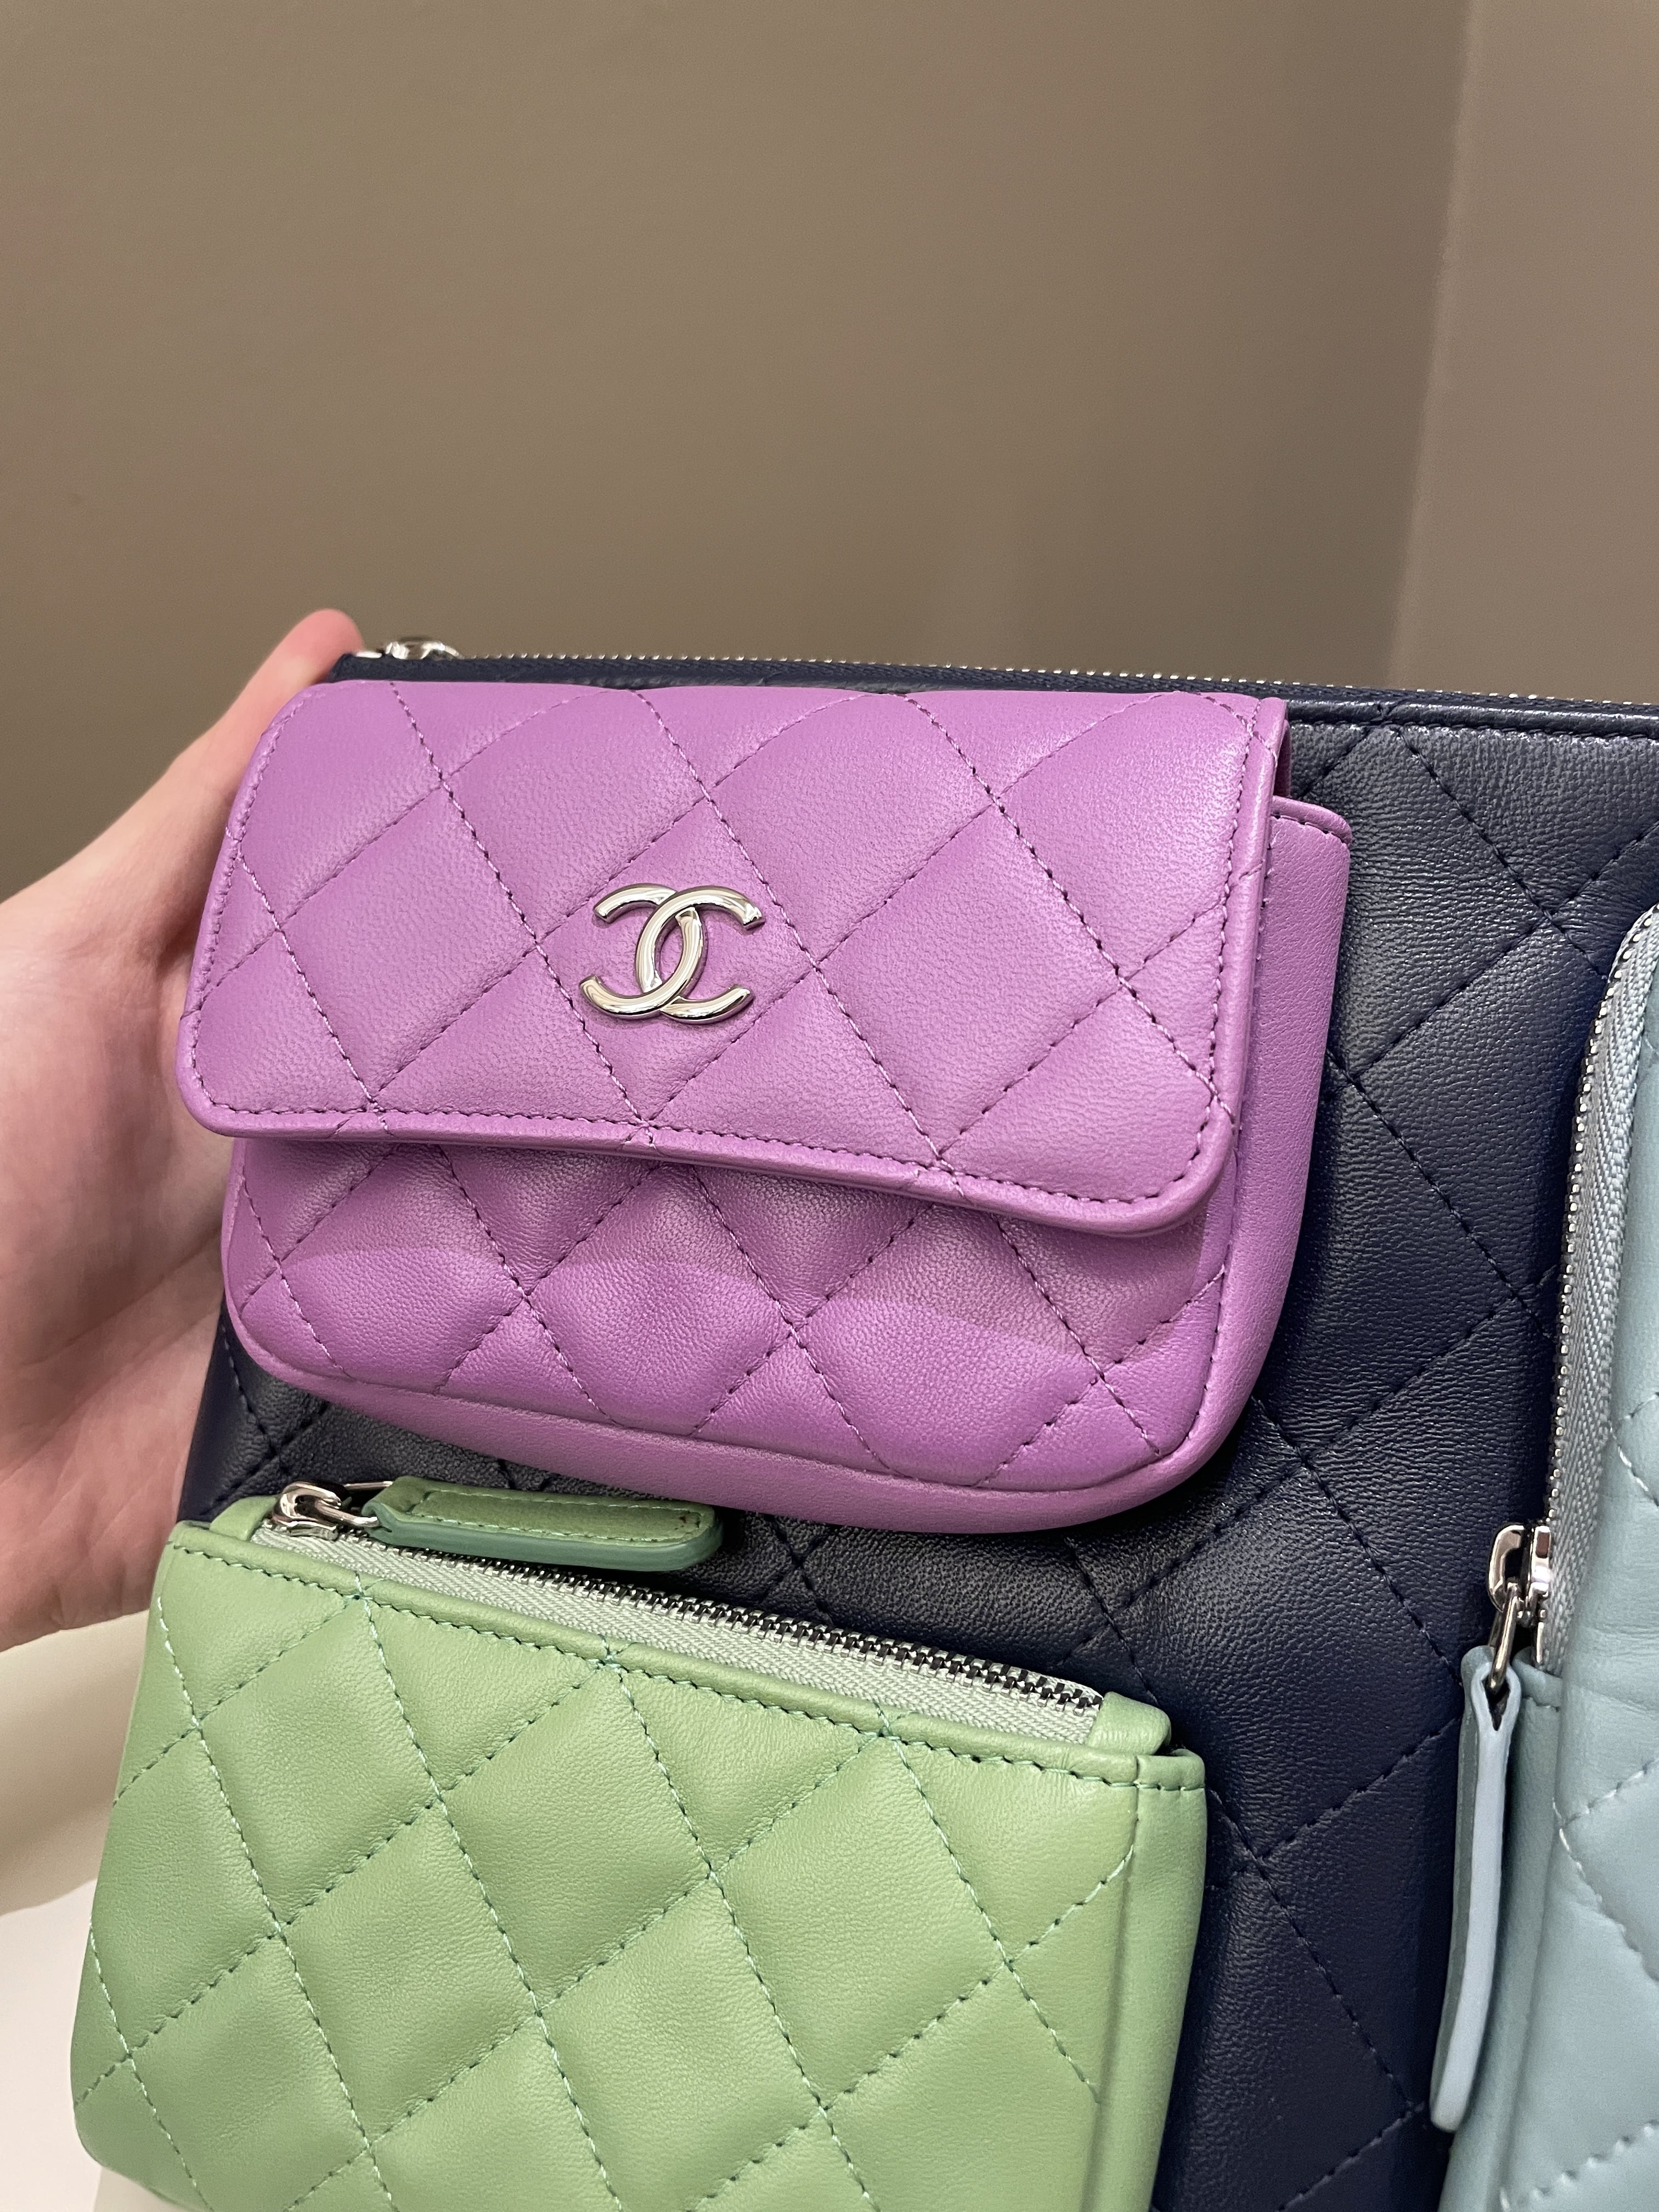 Chanel Quilted Leather Multi Pocket Zip Clutch
Multicolor